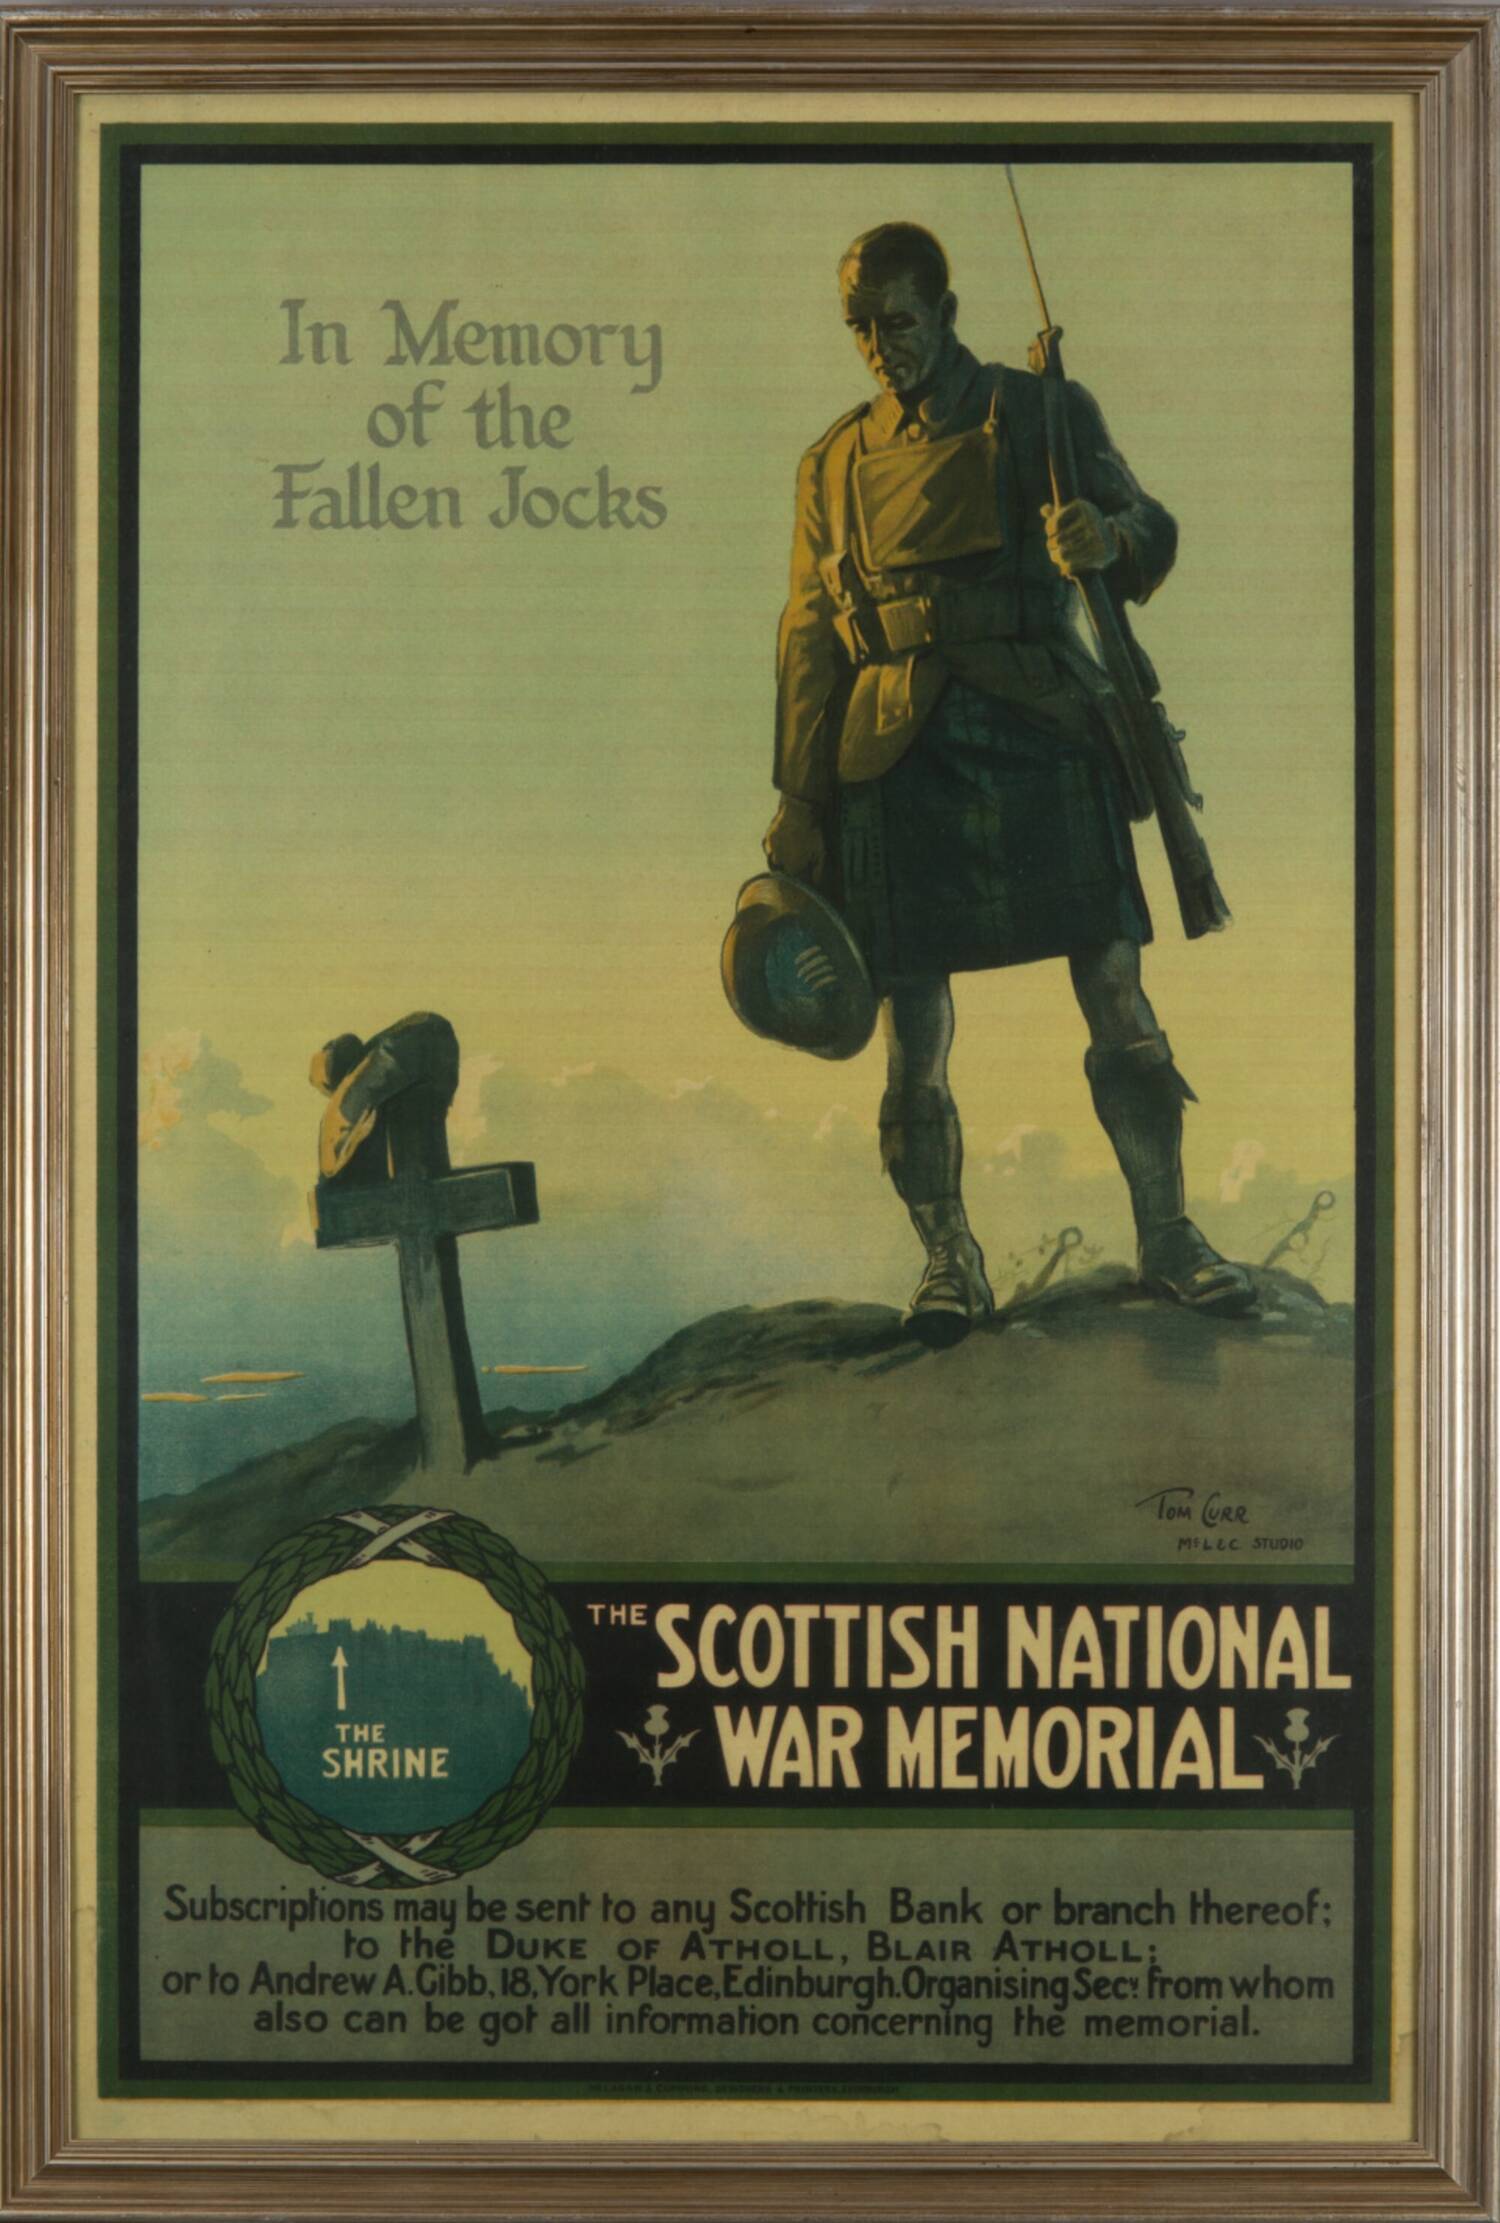 A poster designed to raise funding for the Scottish National War Memorial during the First World War shows a Scottish soldier in traditional kilt dress standing over a stone cross, marking the grave site of a fallen comrade. A rifle is positioned over his left shoulder and he holds a Brodie helmet by his right-hand side. The cross is marked with a tammy hat – a traditional flat bonnet worn in Scotland. 